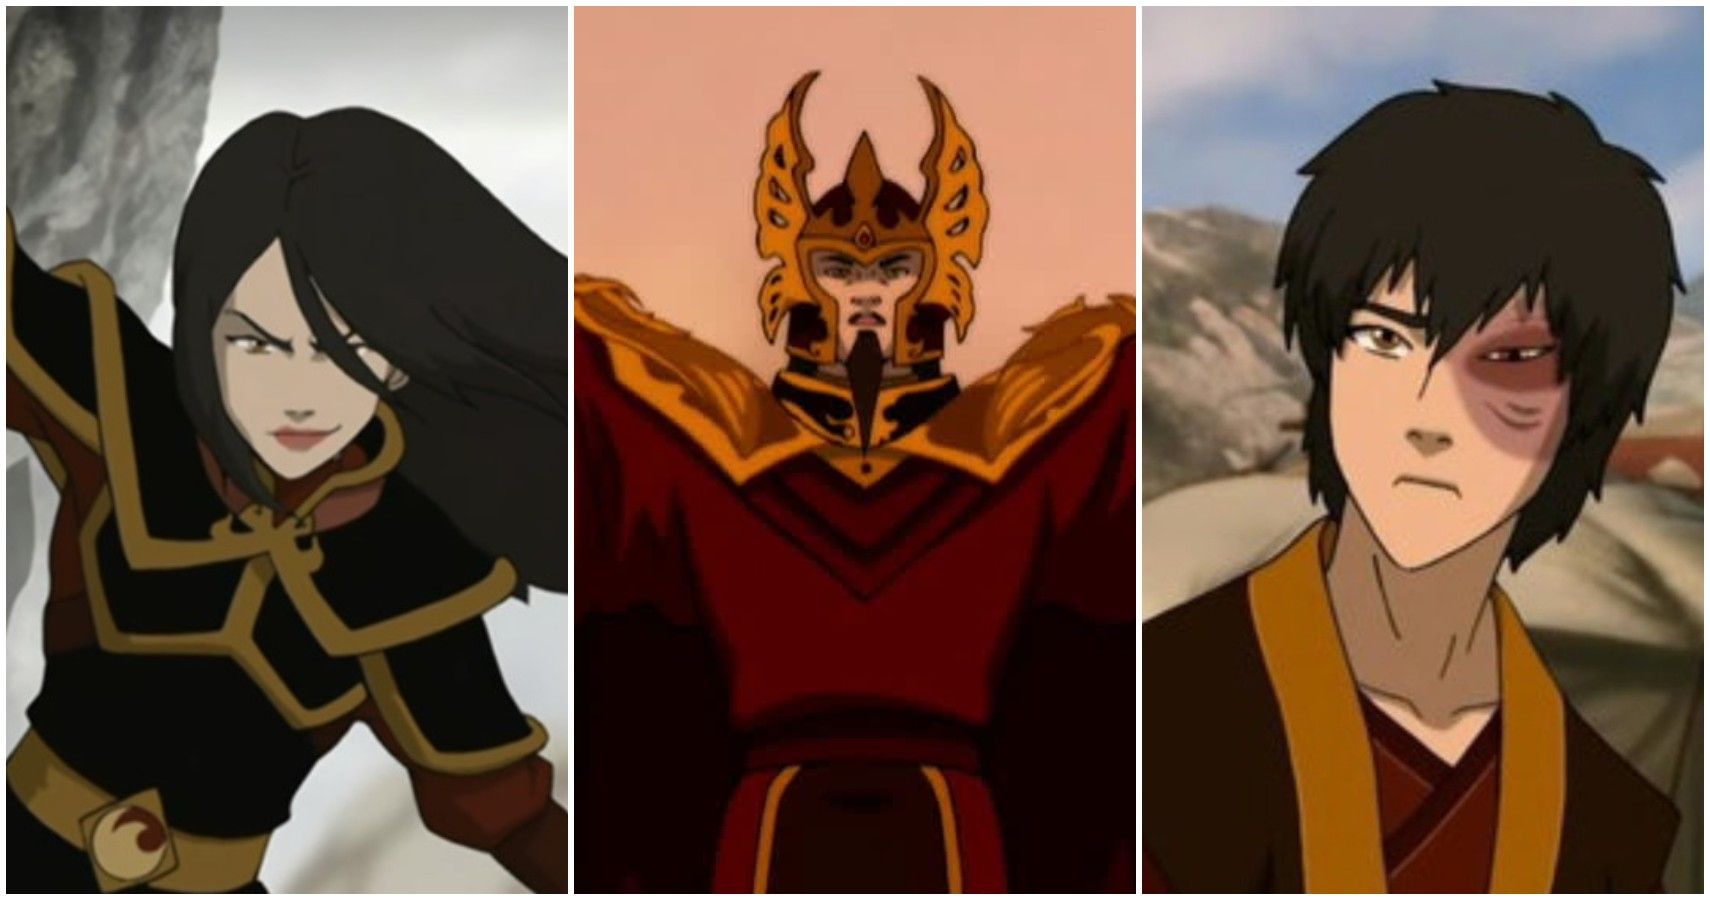 Netflixs Avatar The Last Airbender Casting Members of The Fire Nation   Murphys Multiverse